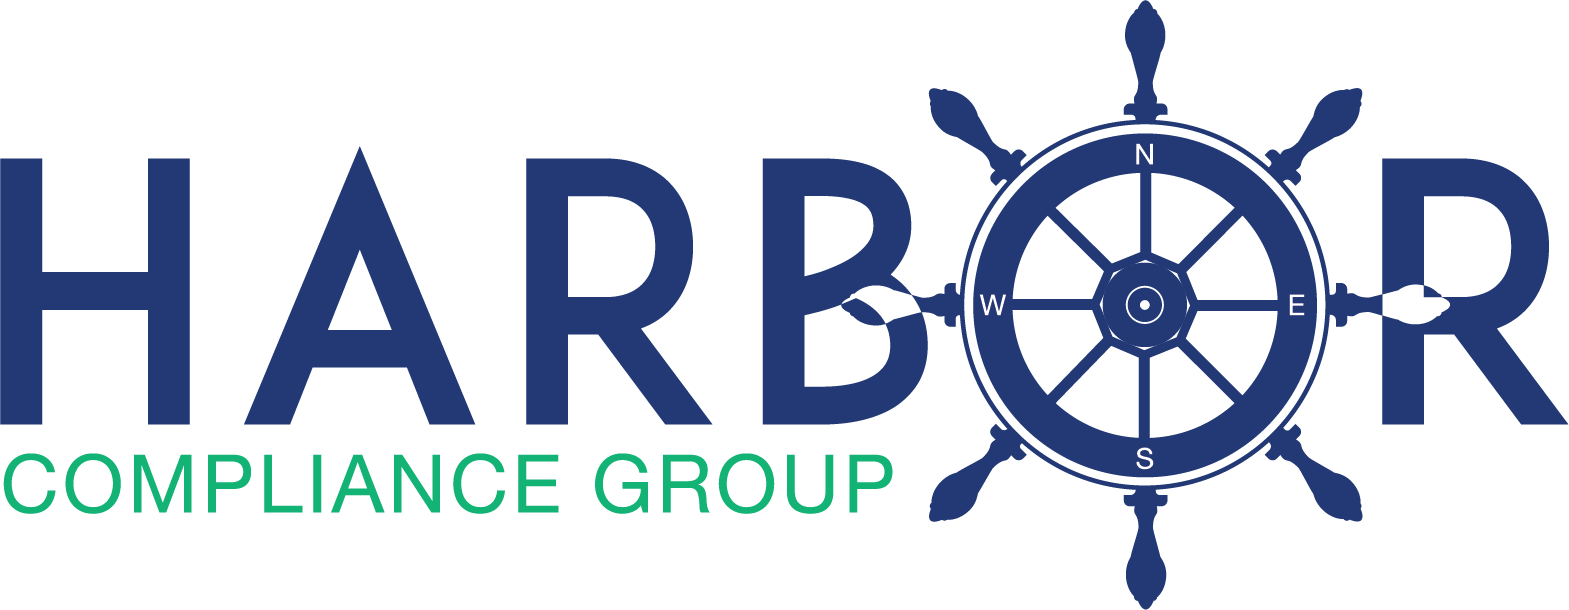 Harbor Compliance Group